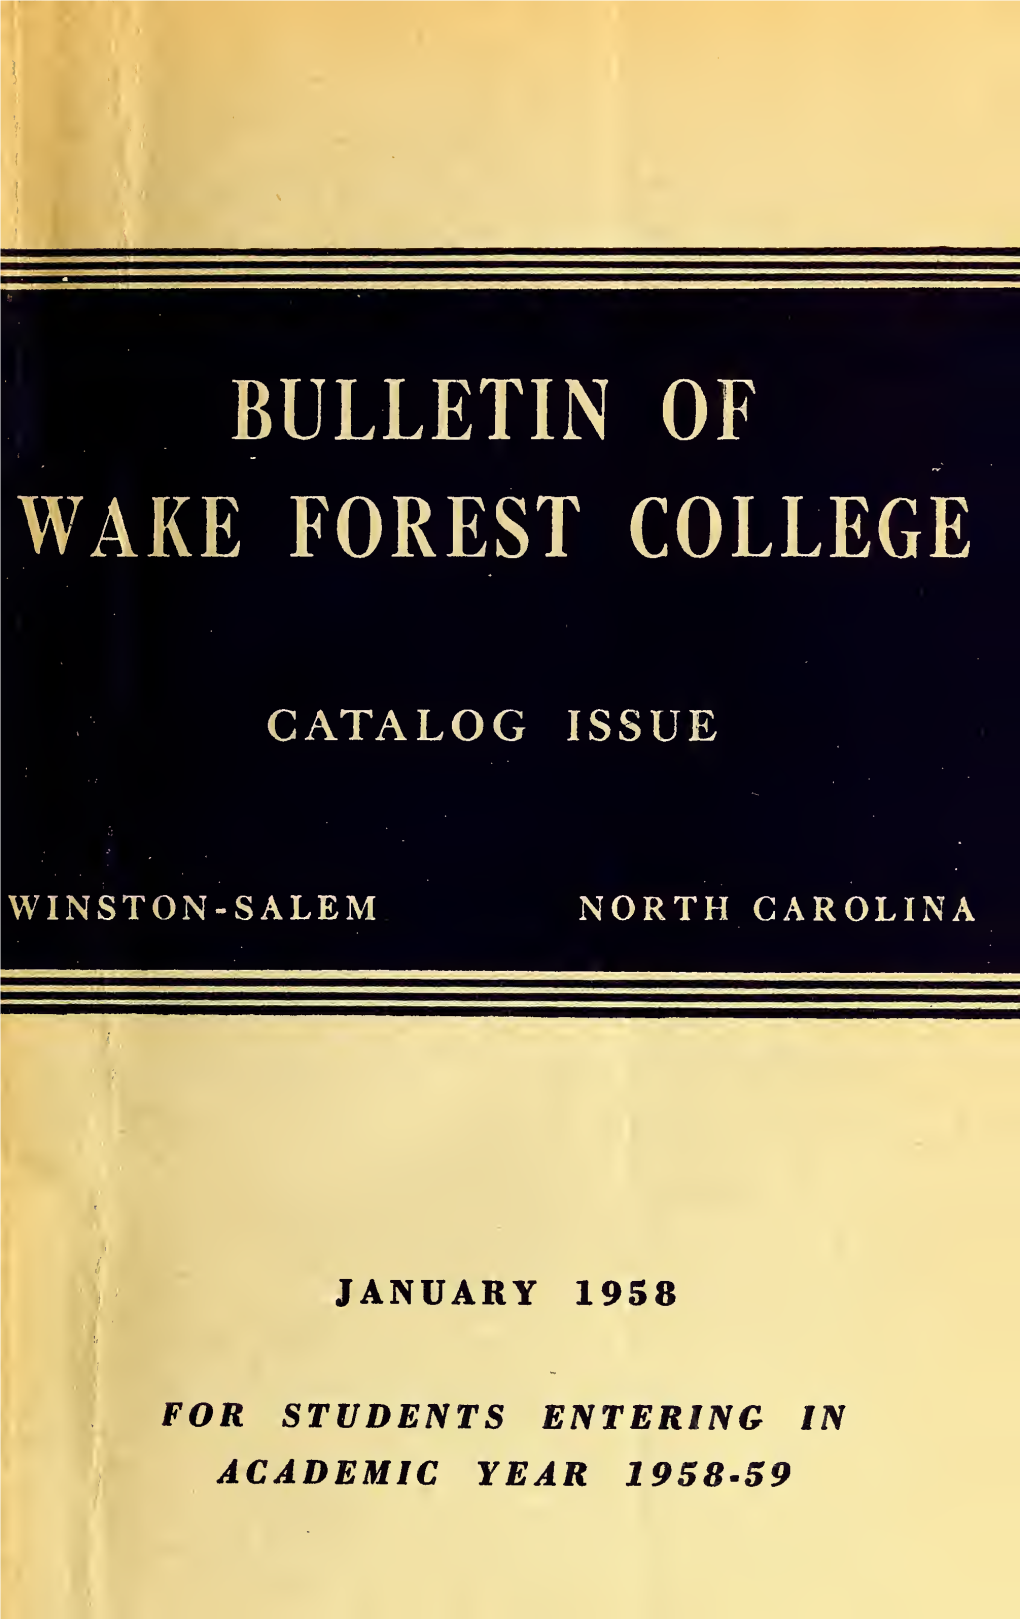 Bulletin of Wake Forest College